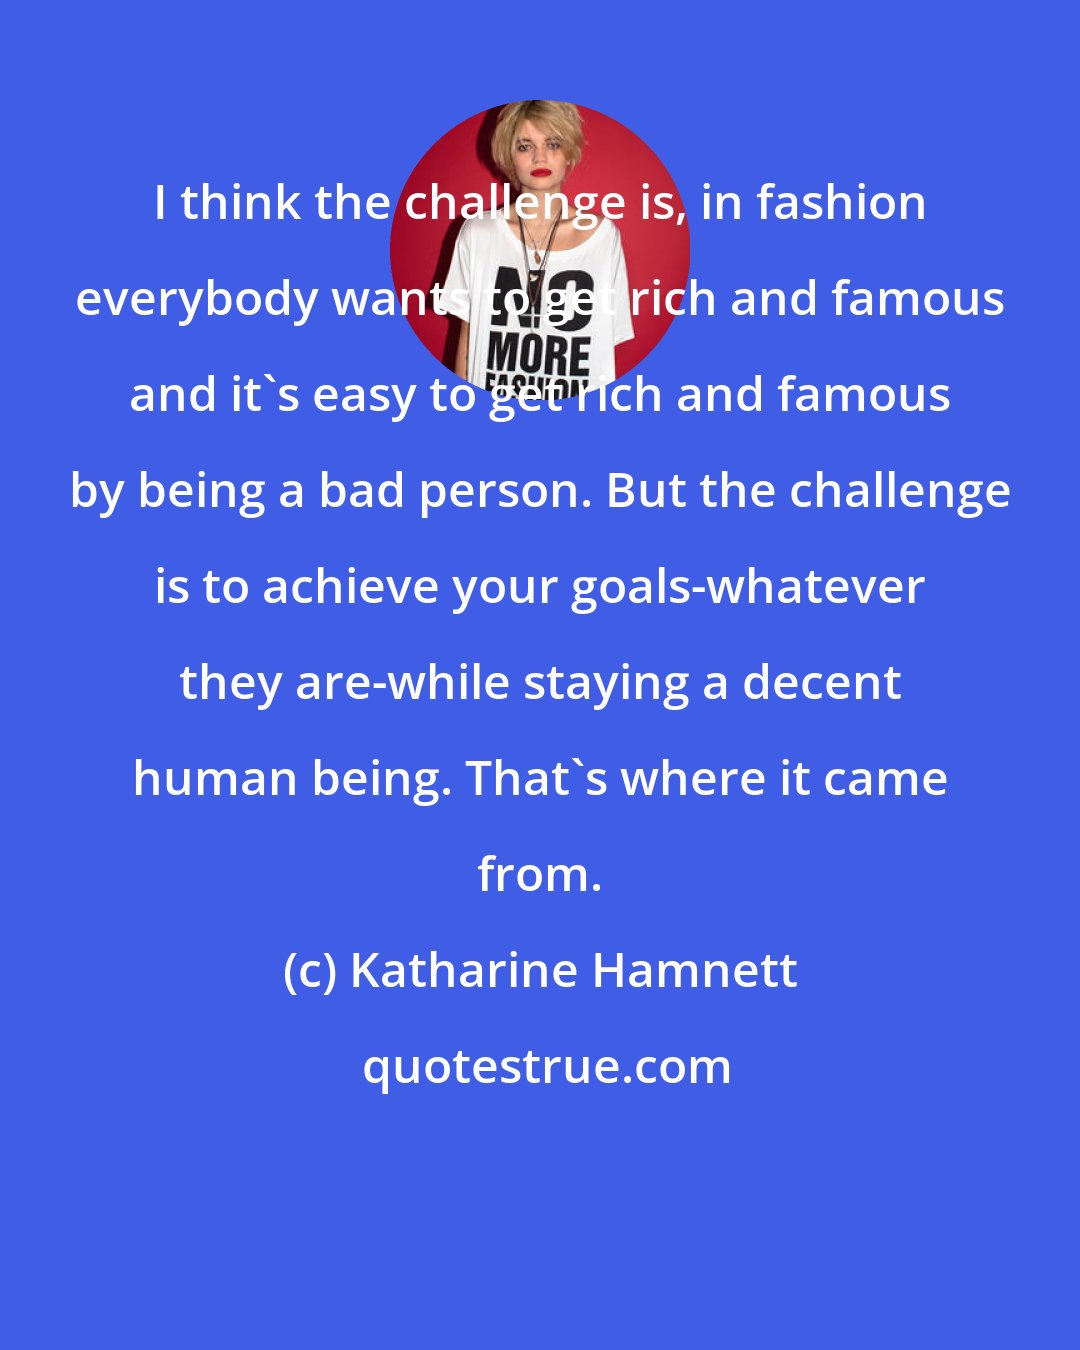 Katharine Hamnett: I think the challenge is, in fashion everybody wants to get rich and famous and it's easy to get rich and famous by being a bad person. But the challenge is to achieve your goals-whatever they are-while staying a decent human being. That's where it came from.